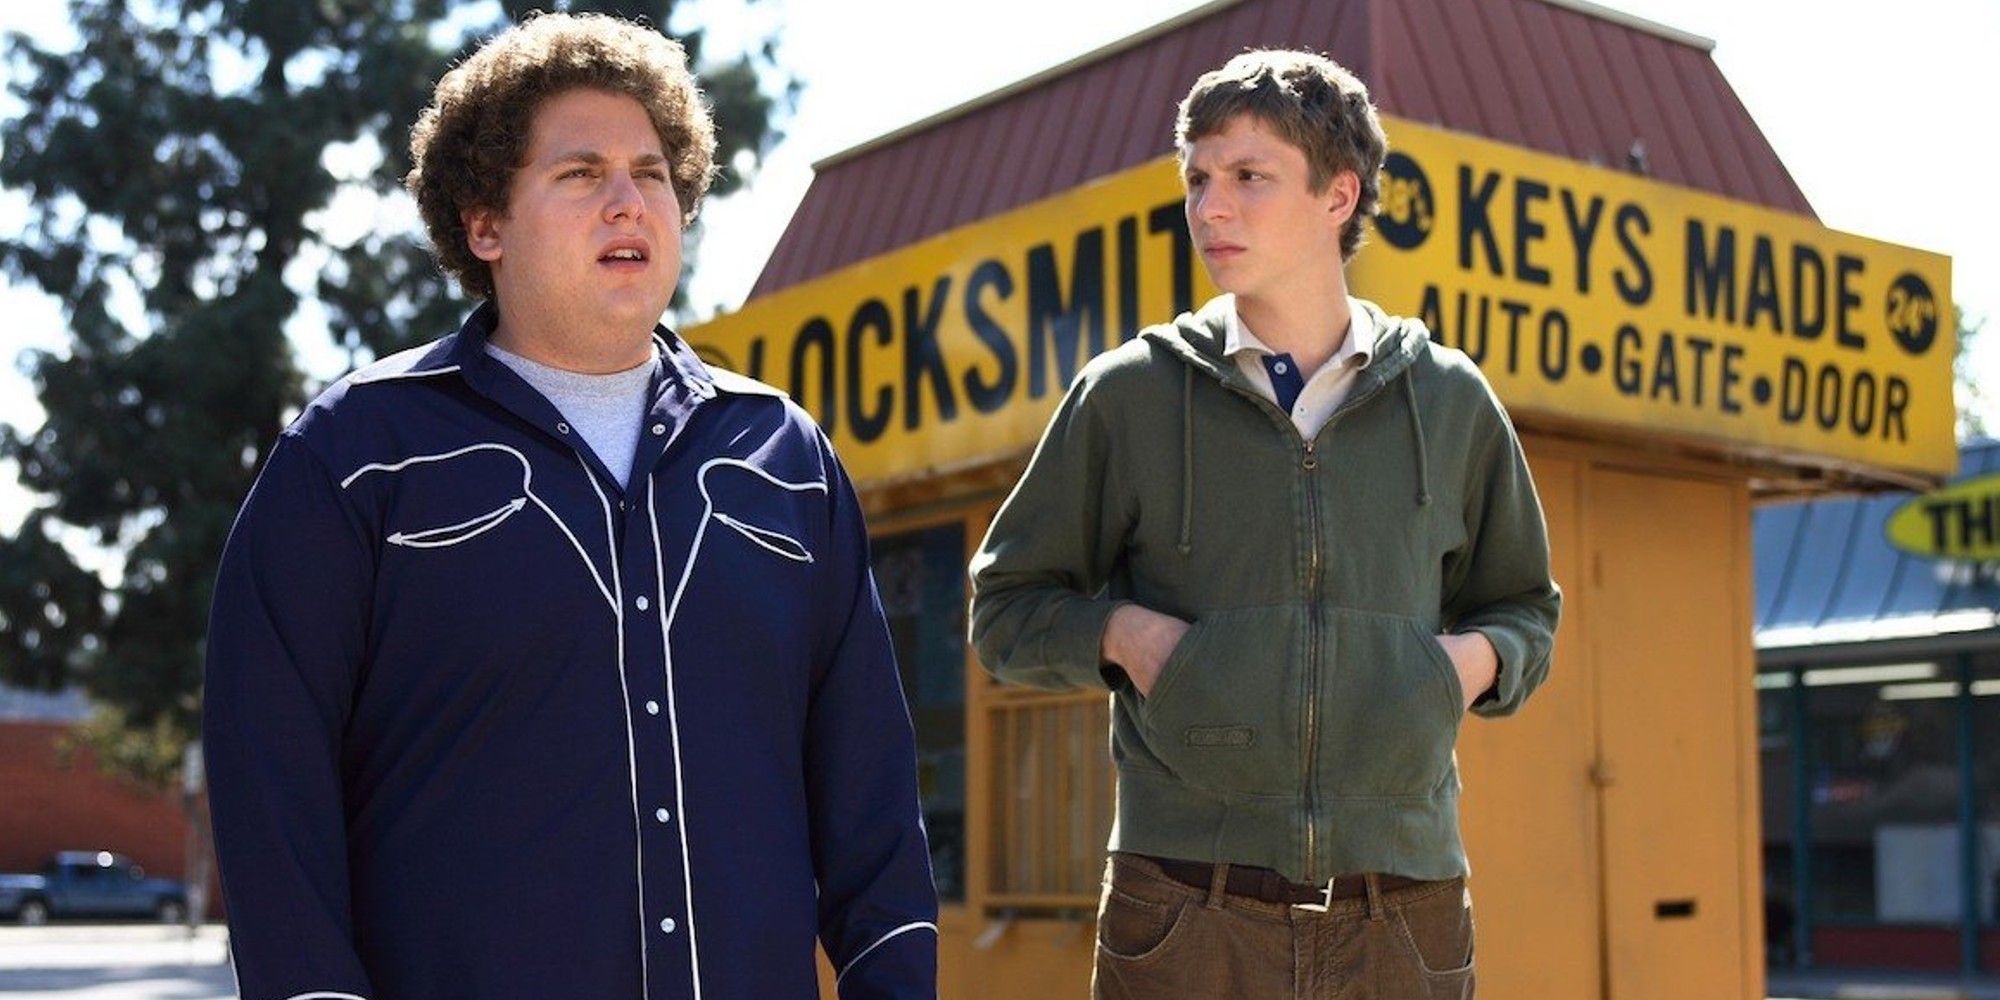 Seth and Evan on the street in Superbad